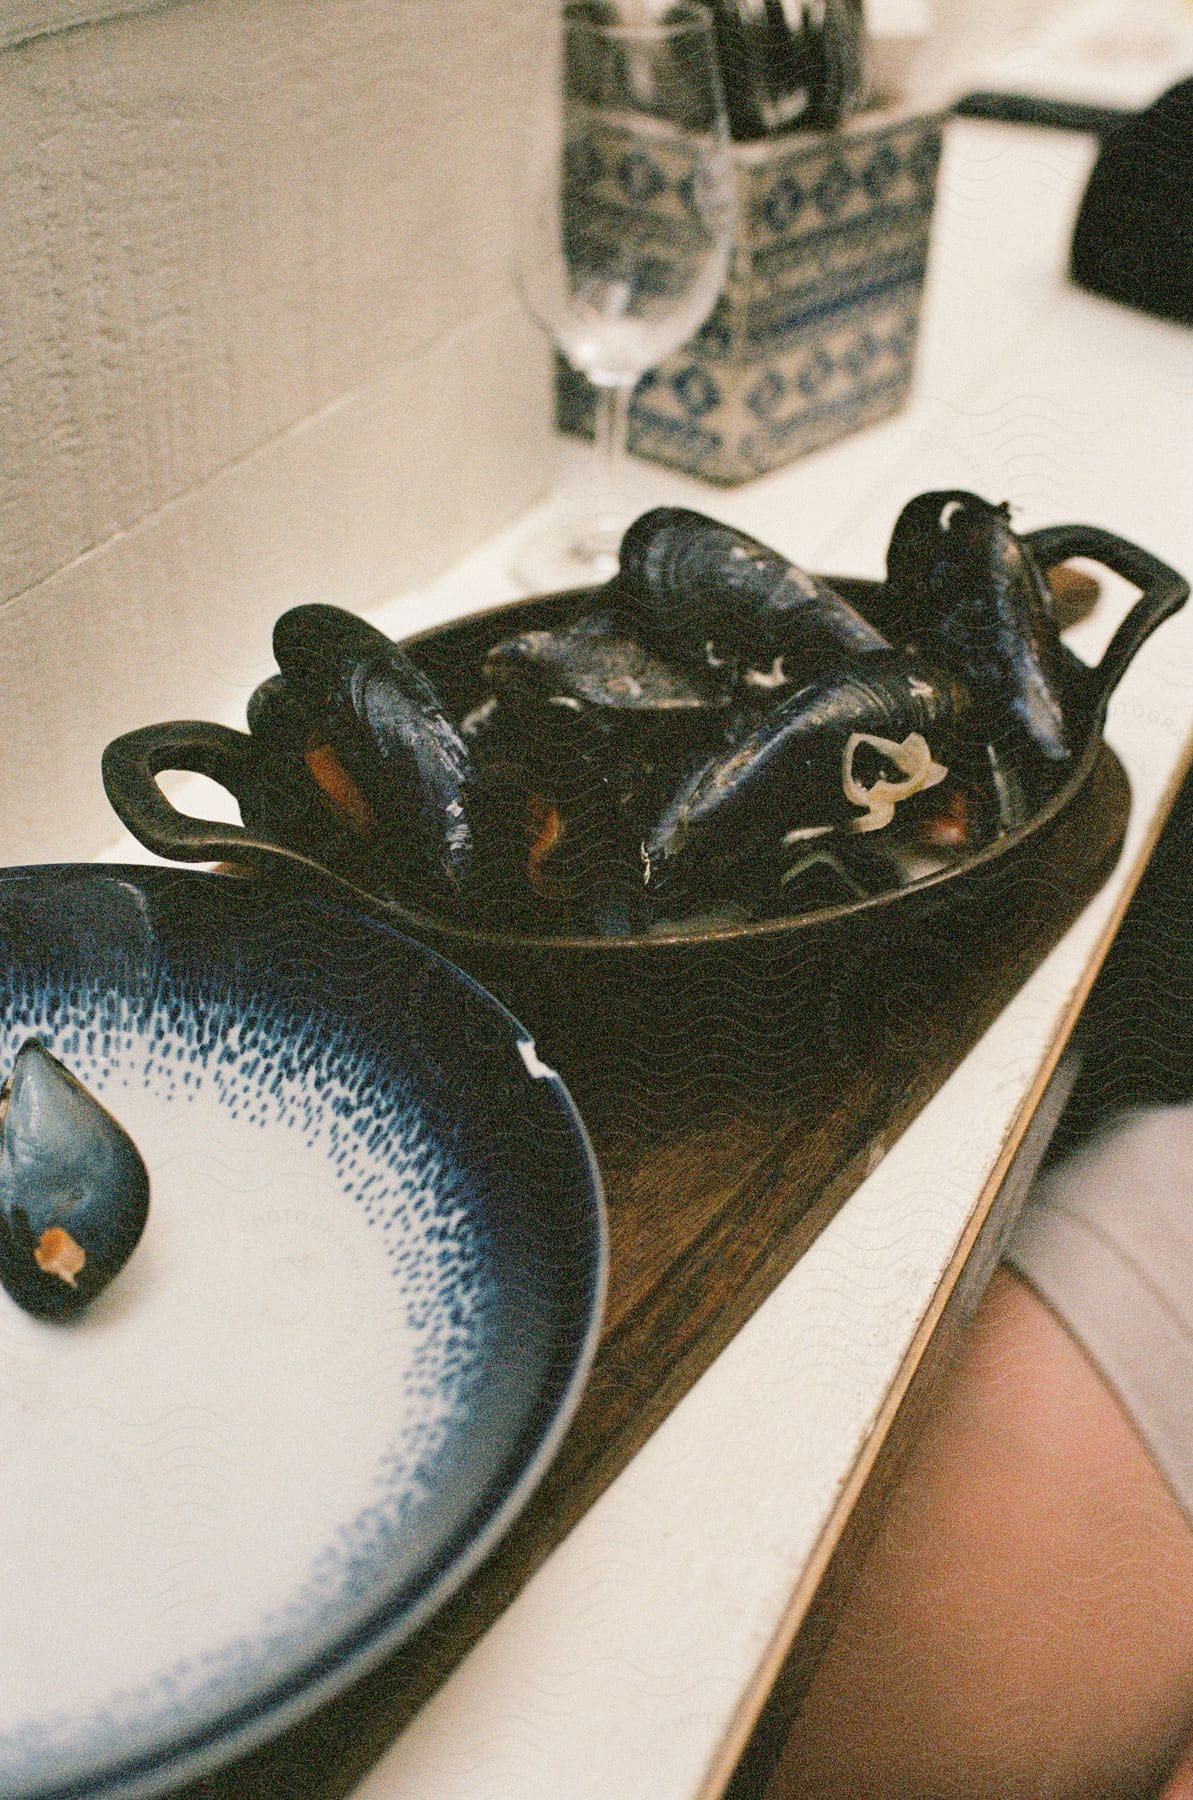 Bowl with oysters on a wooden board